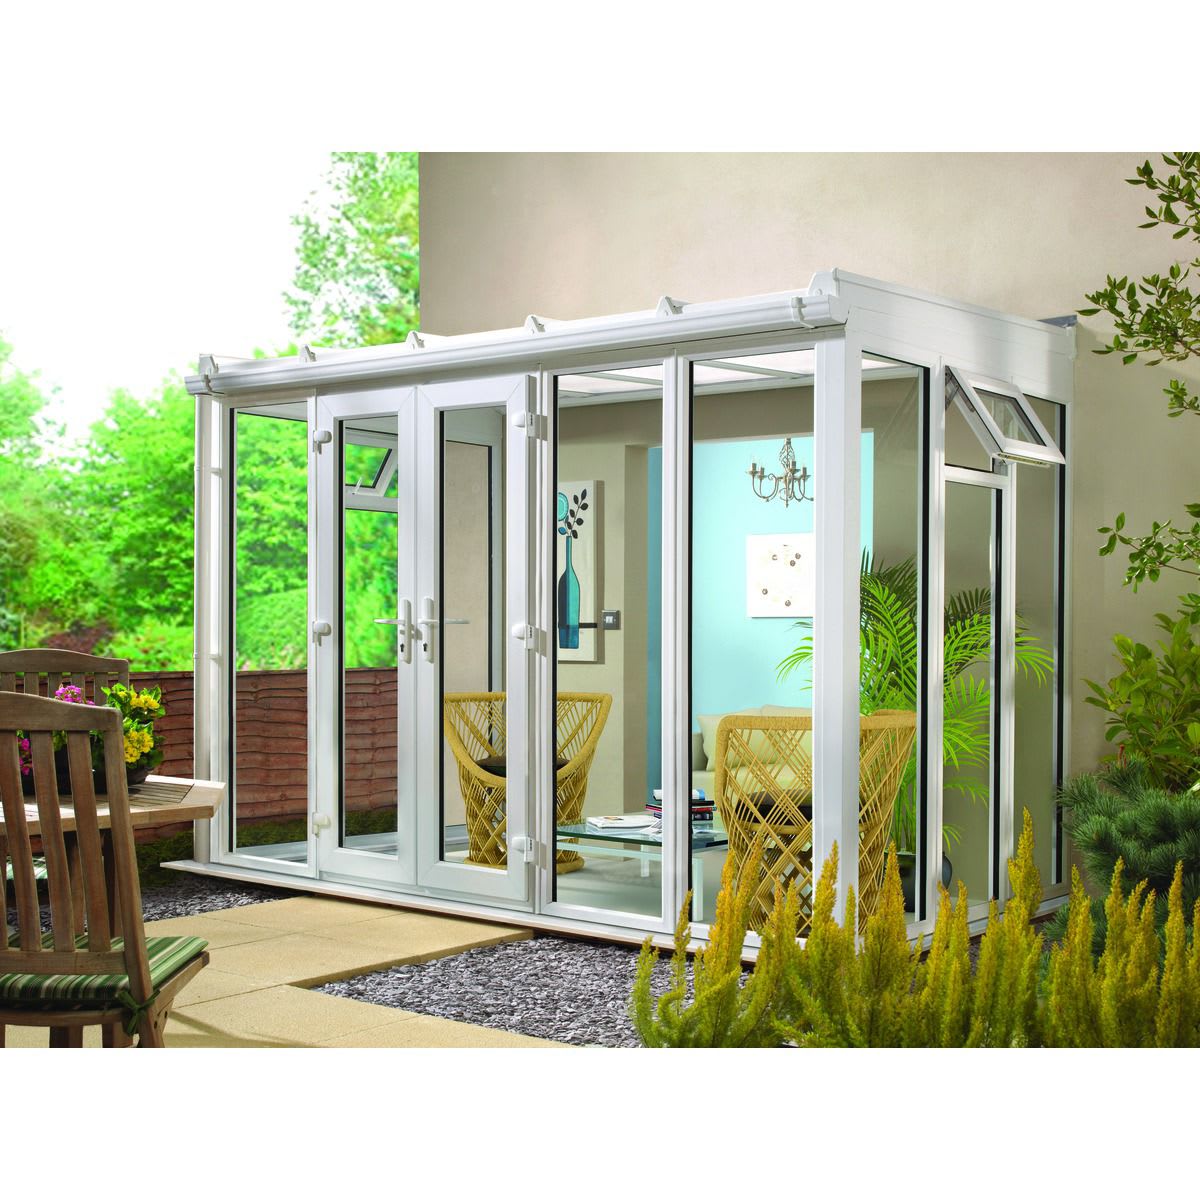 Wickes Lean To Rooffull Glass Conservatory - 13